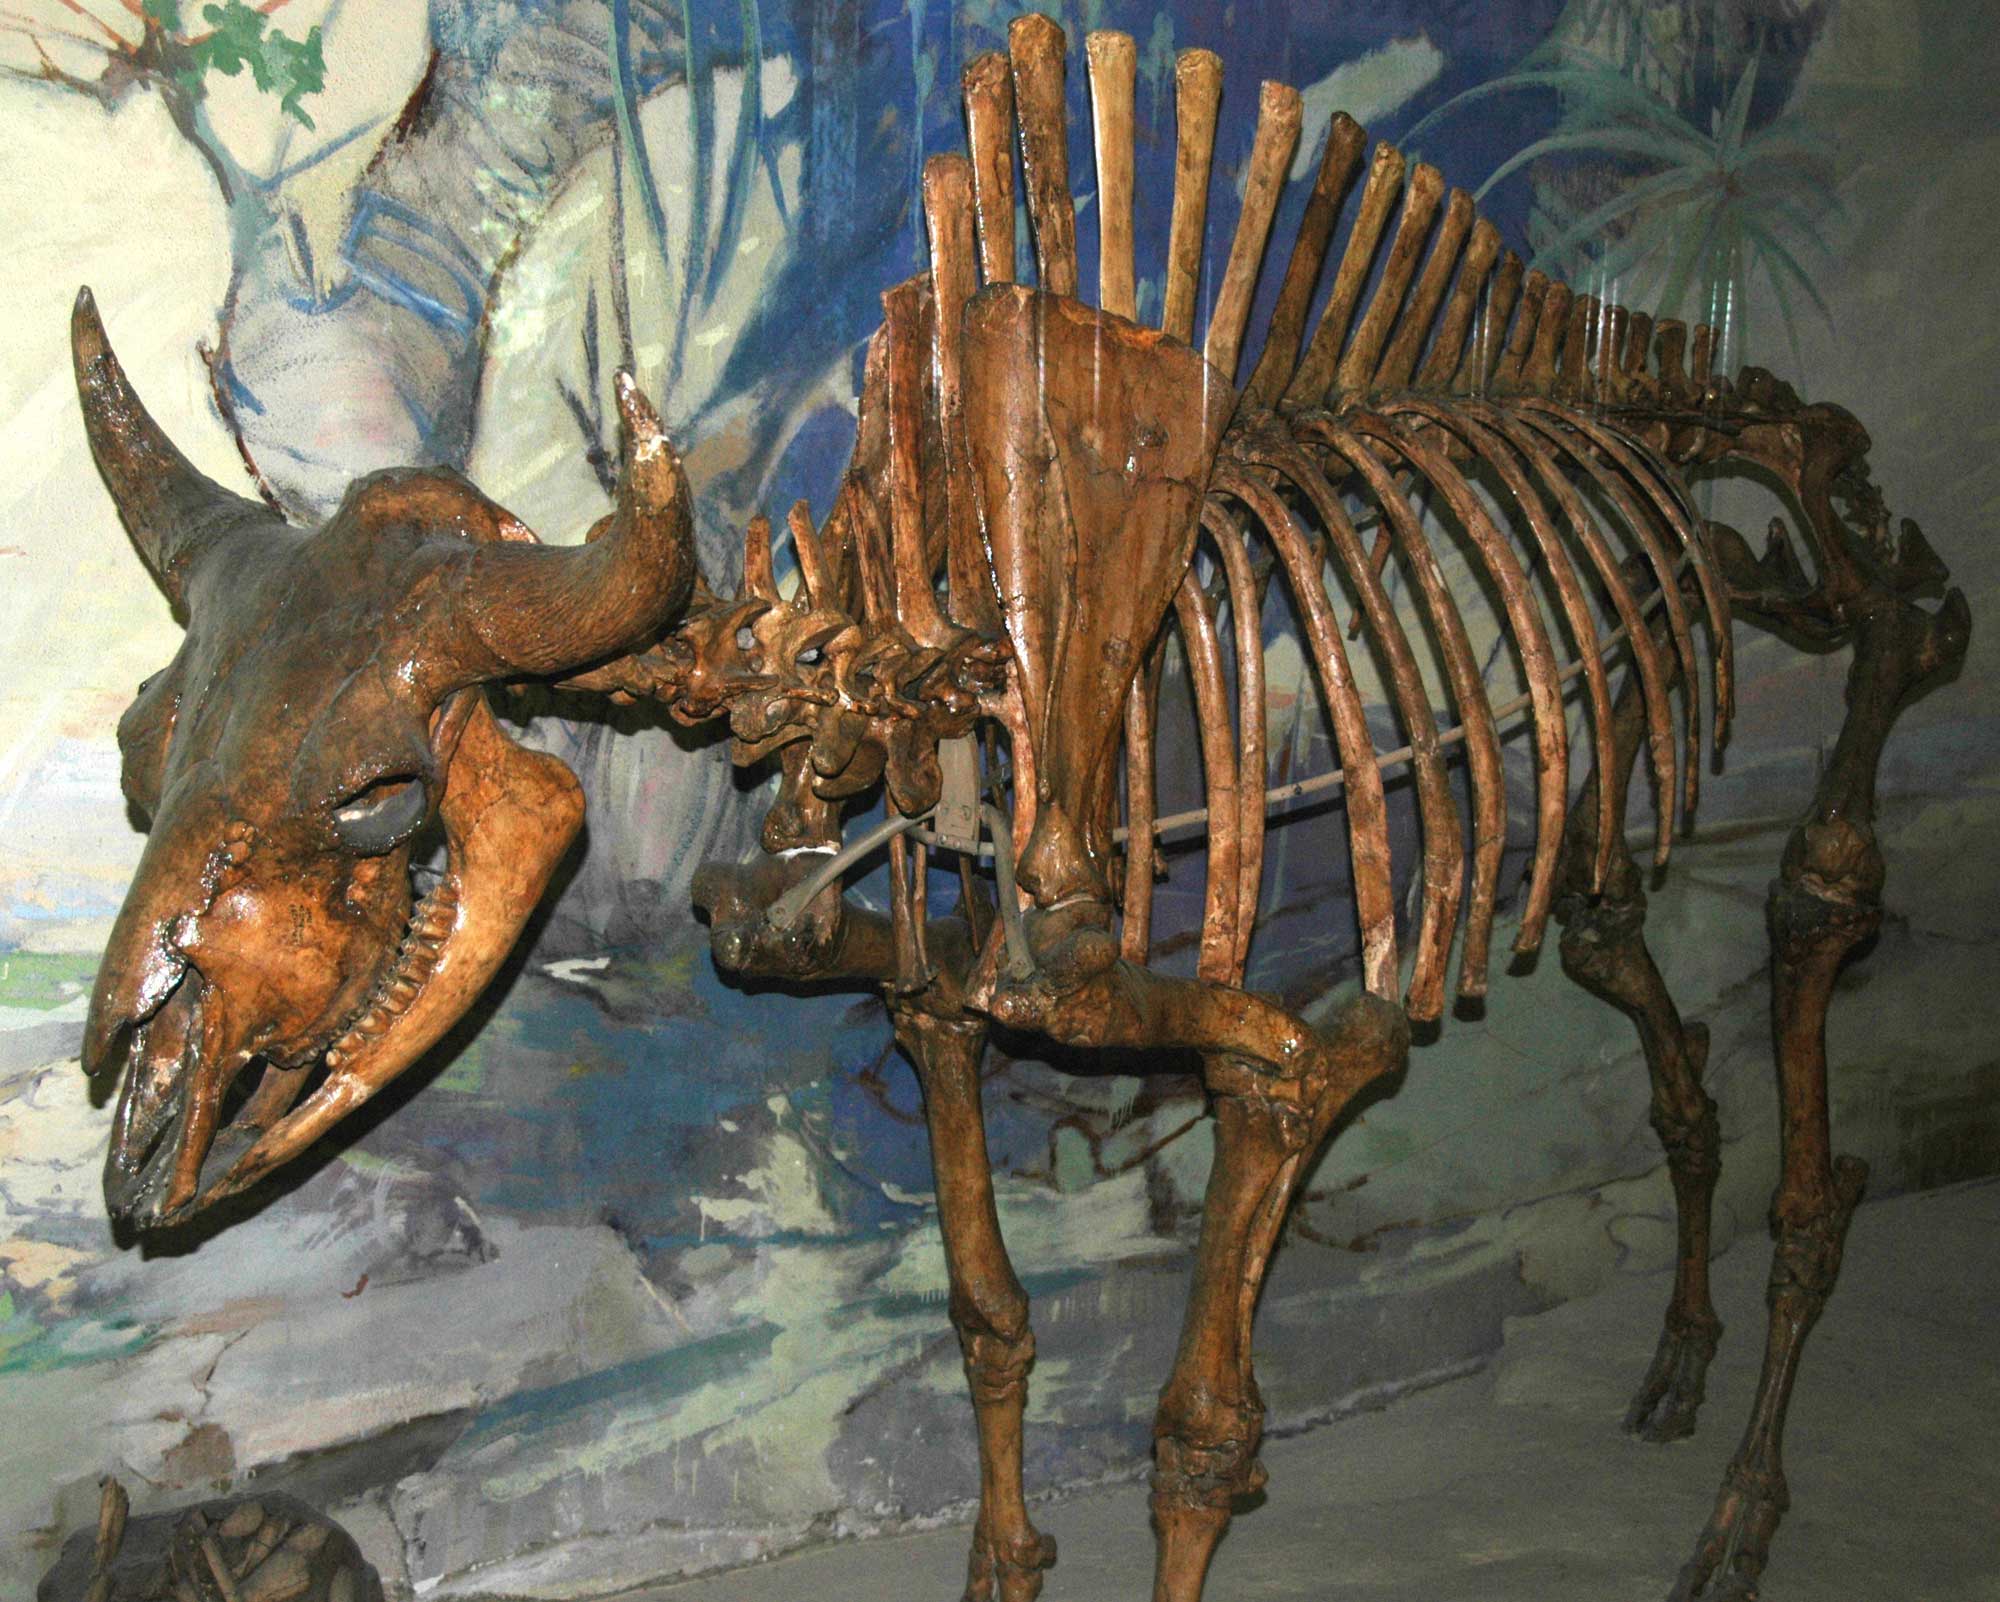 Photograph of a skeleton of Bison antiquus taylori from the Pleistocene of Nebraska on display in a museum. The photo shows a large, hoofed animal standing on four legs. The spines on the vertebrate between the shoulder blades are very tall. The head is robust with two short horns extending horizontally, then turning upward. The tail is short. 